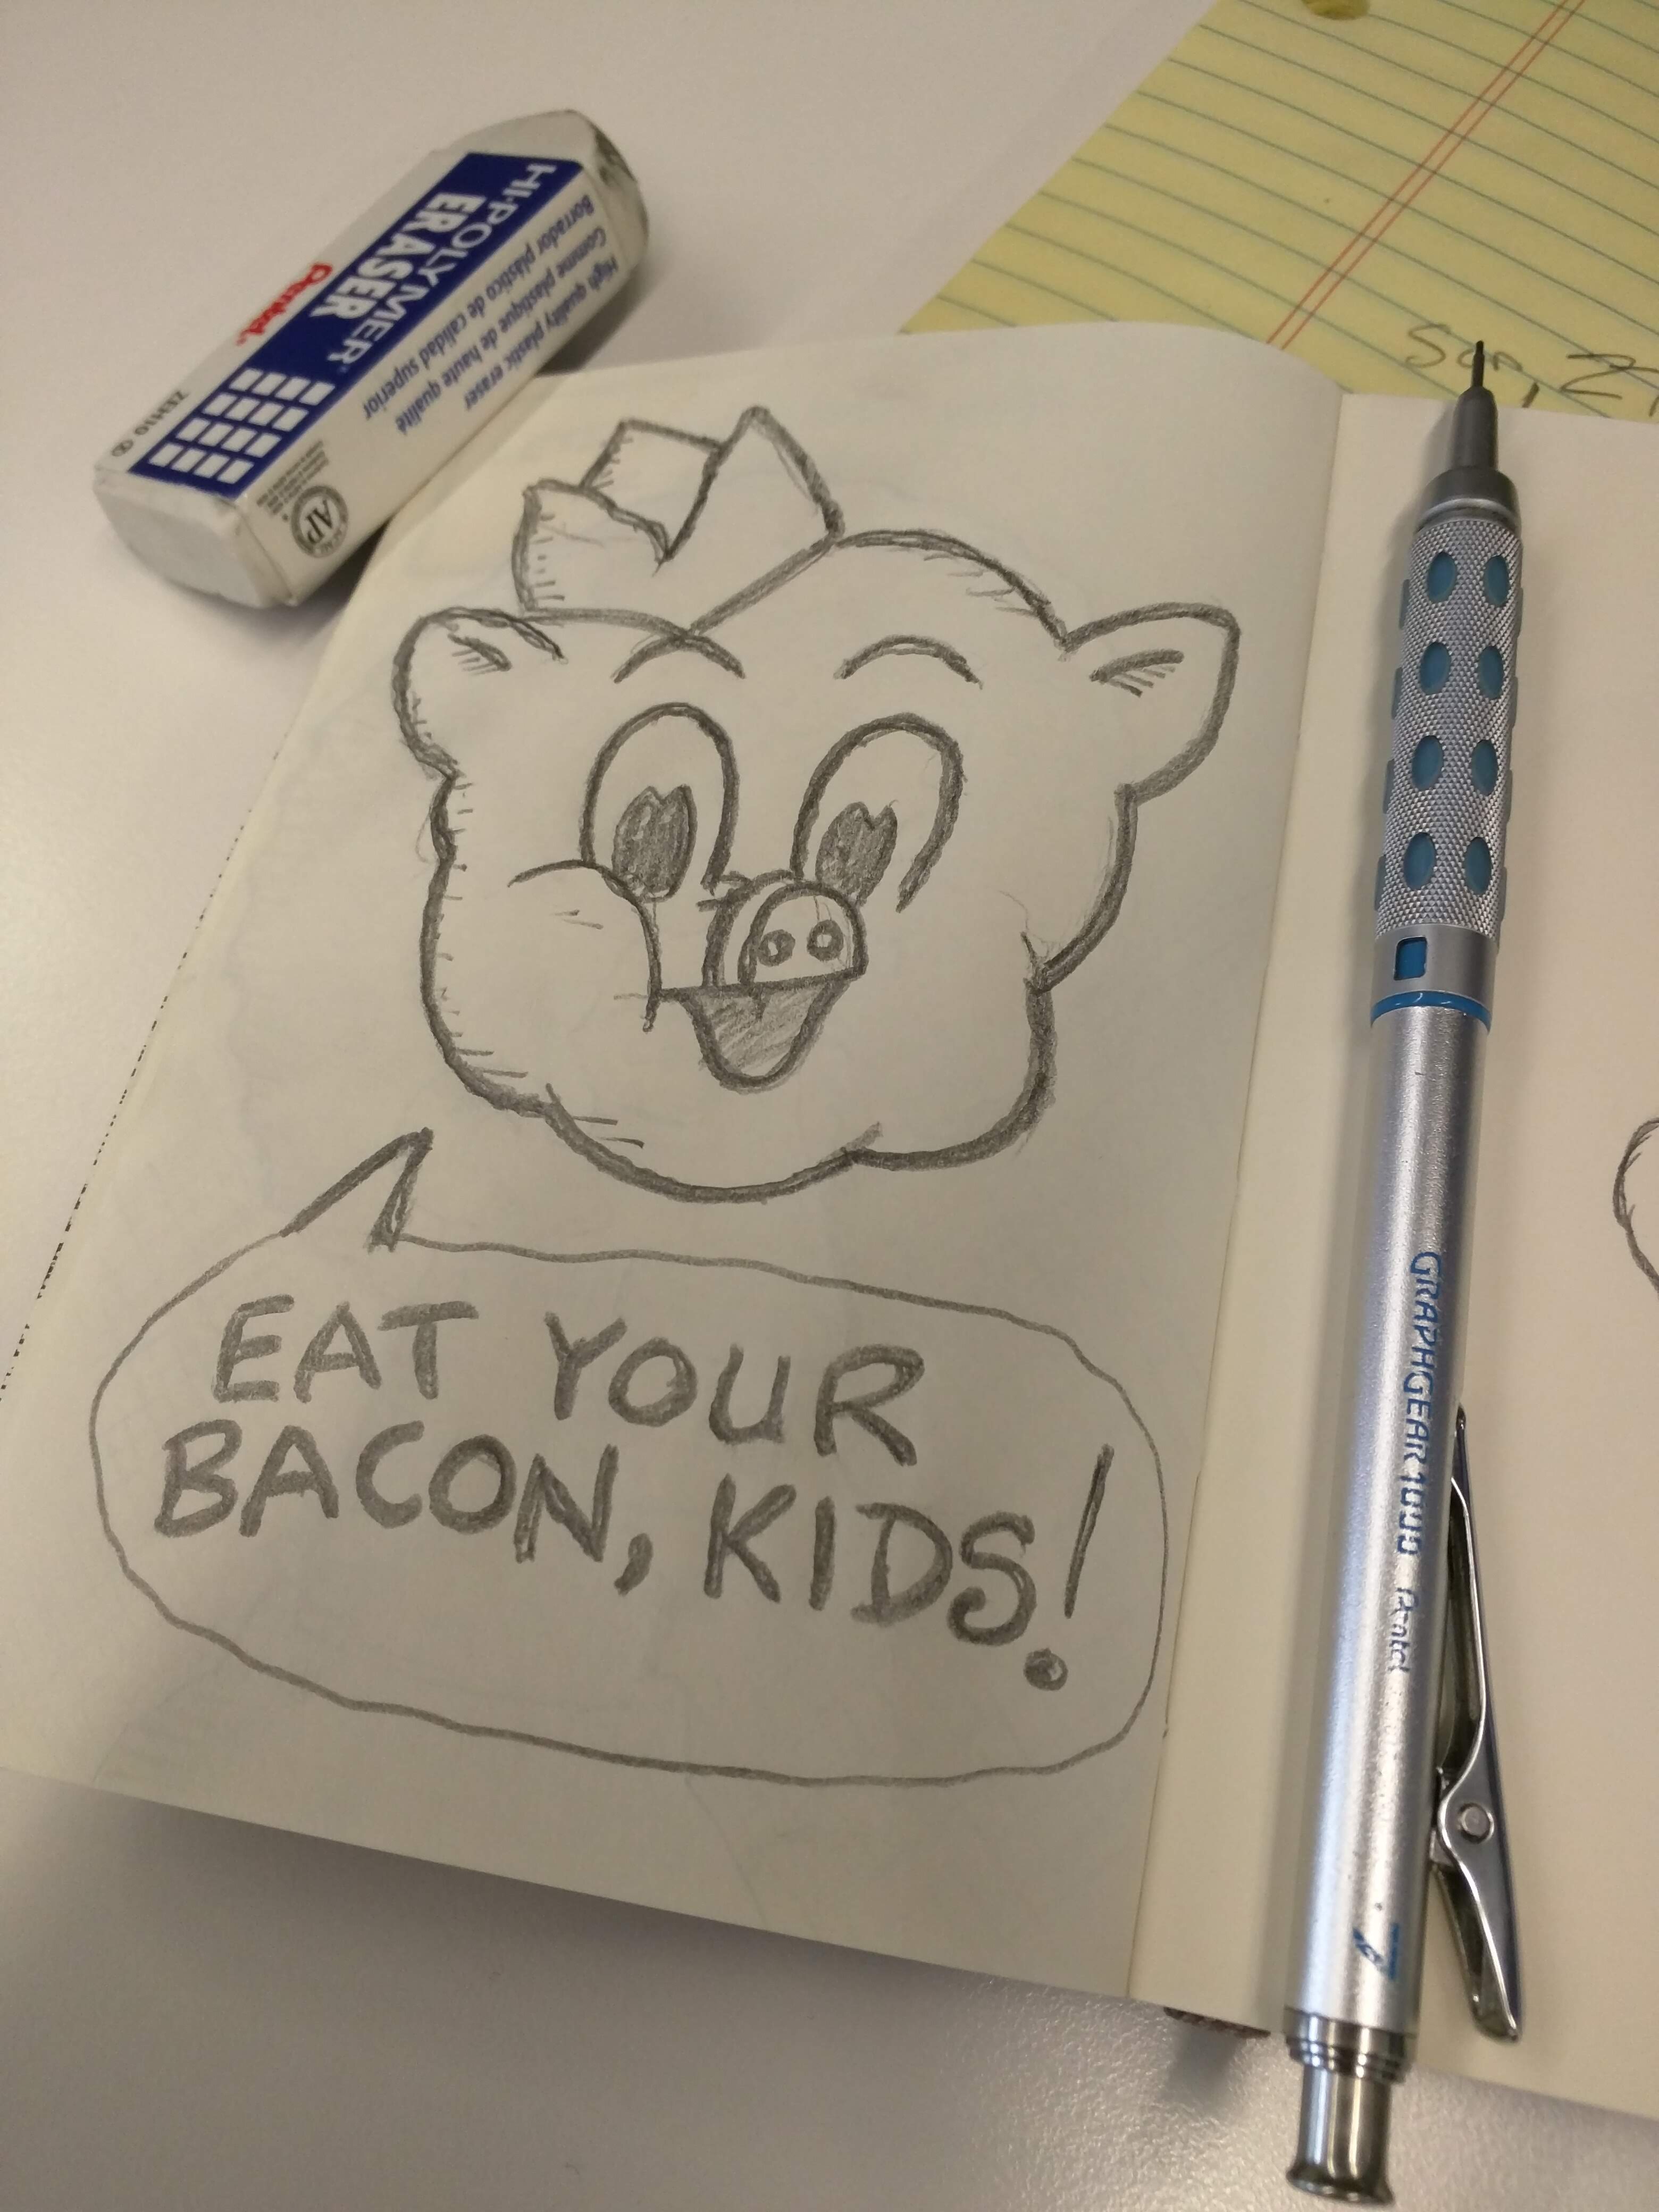 A drawing of a pig telling you to eat bacon.